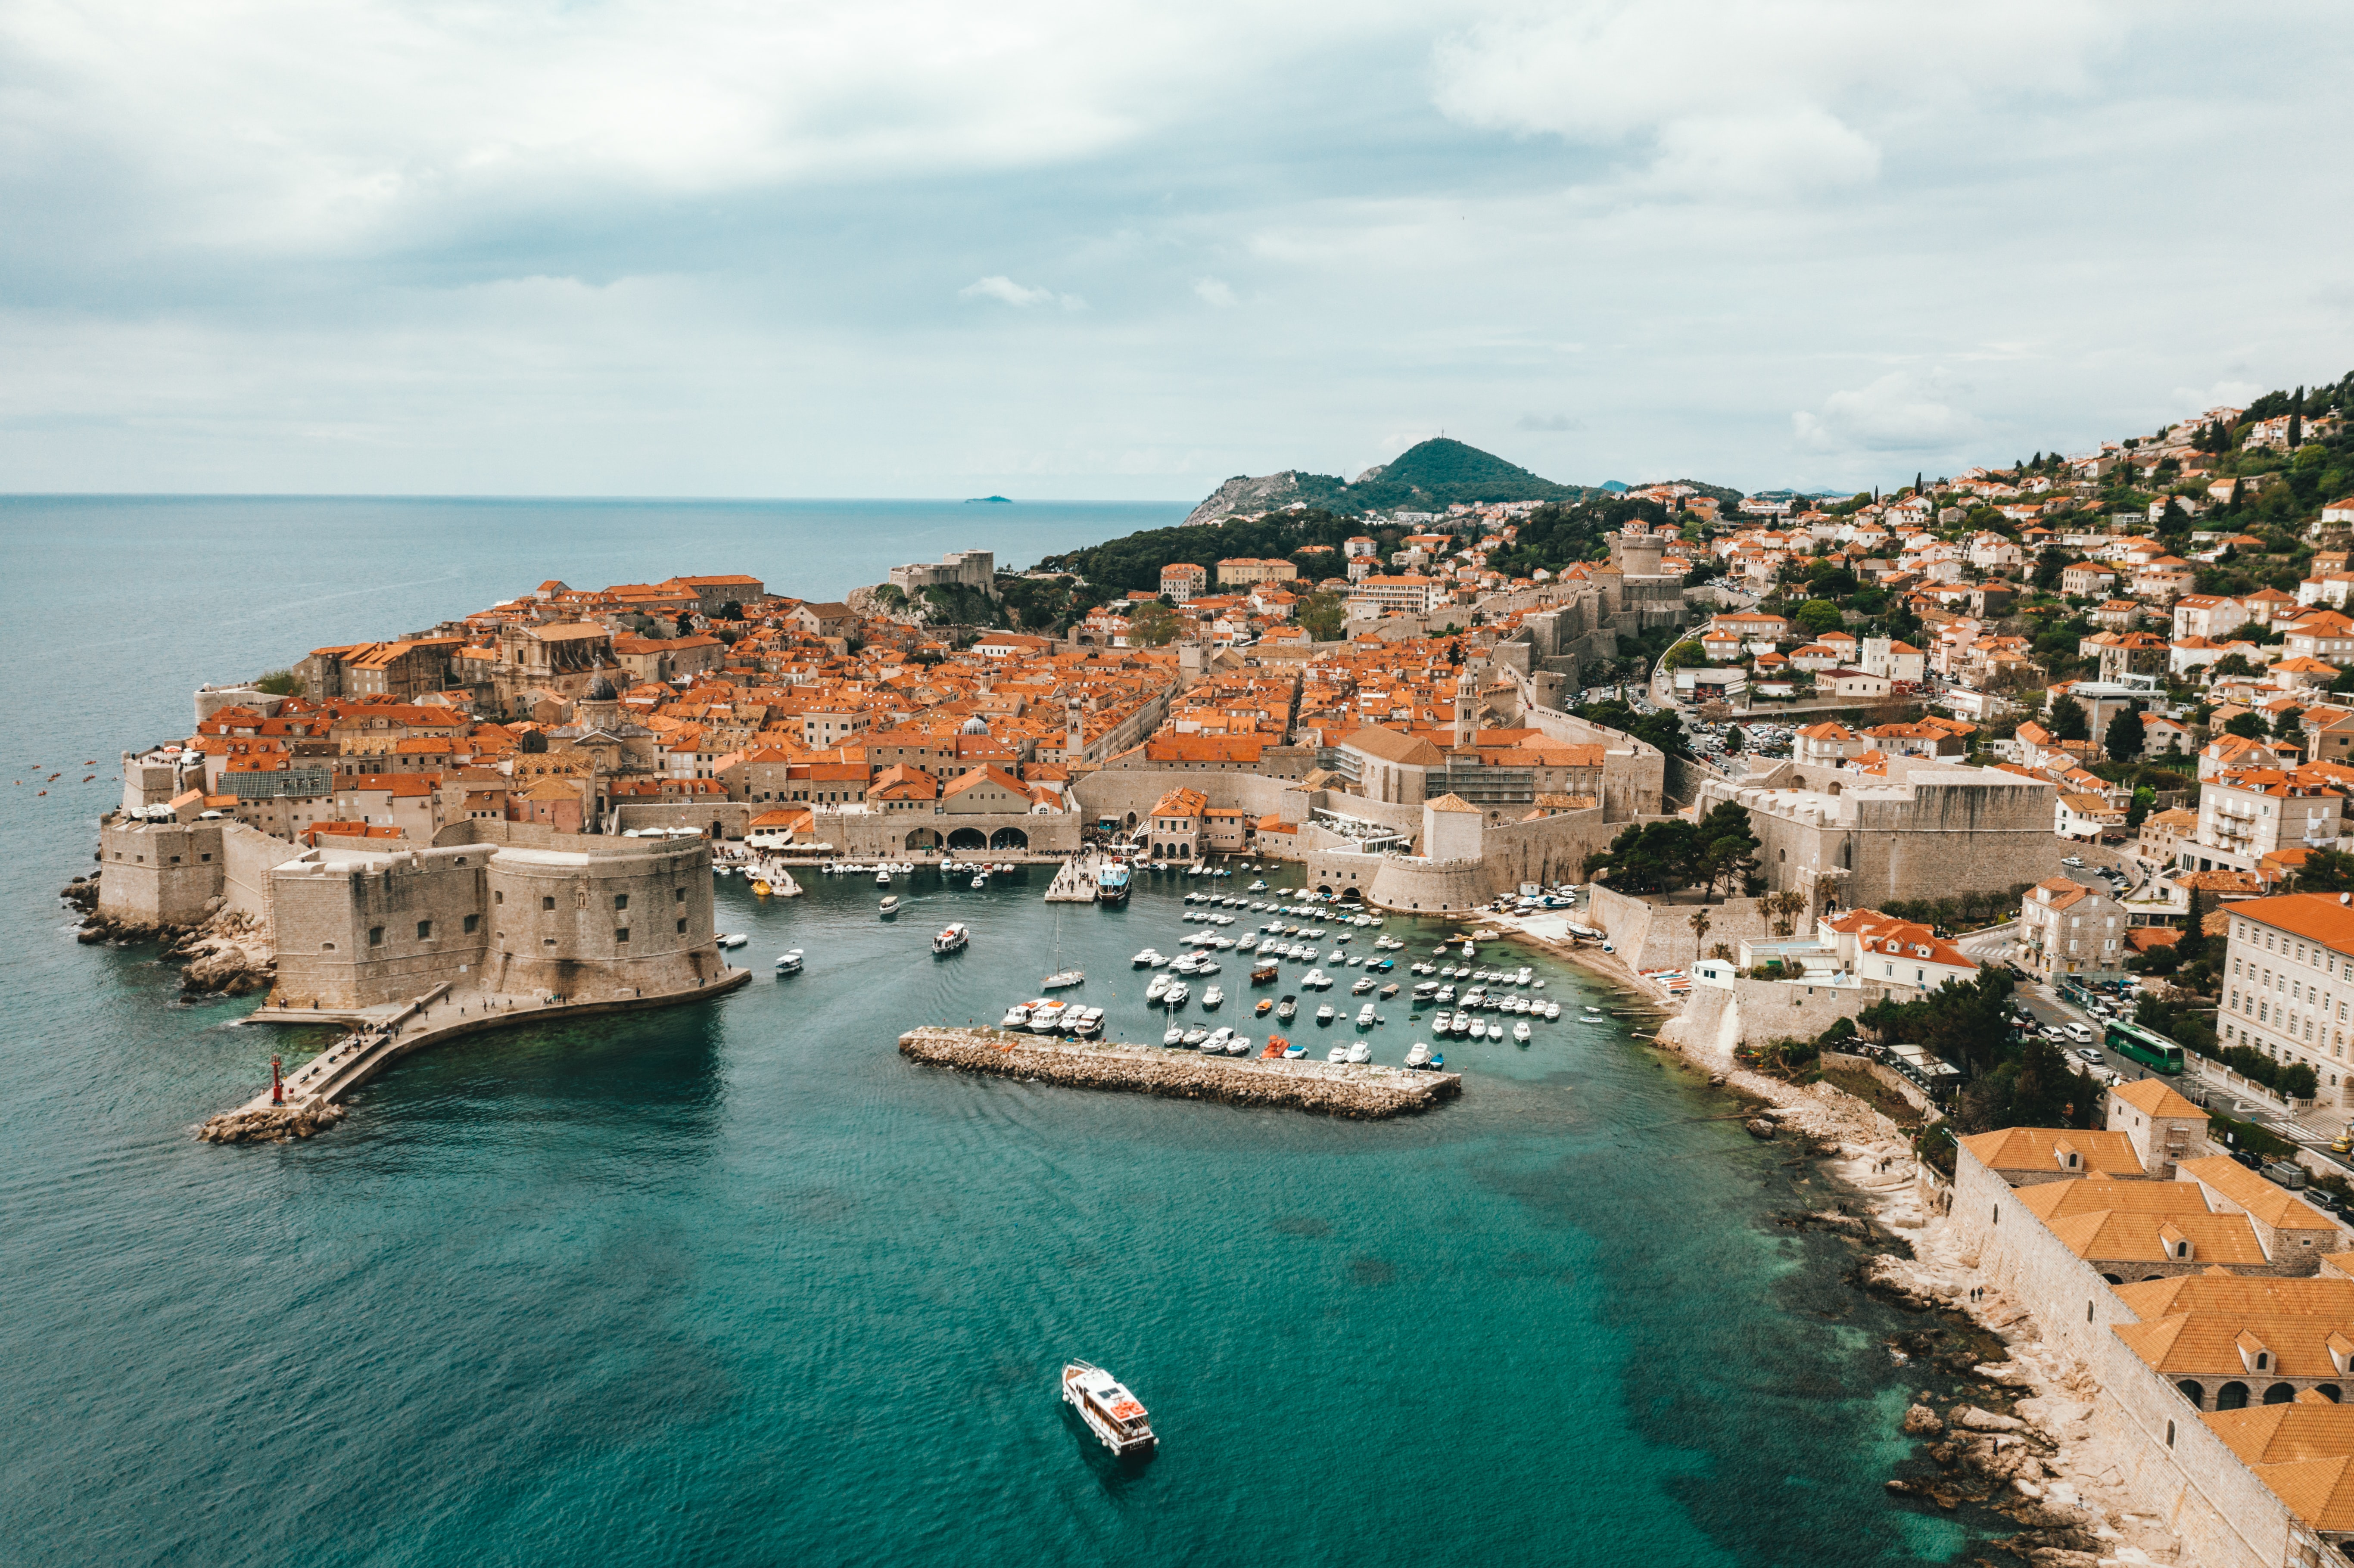 The old town of Dubrovnik, Croatia by Spencer Davis